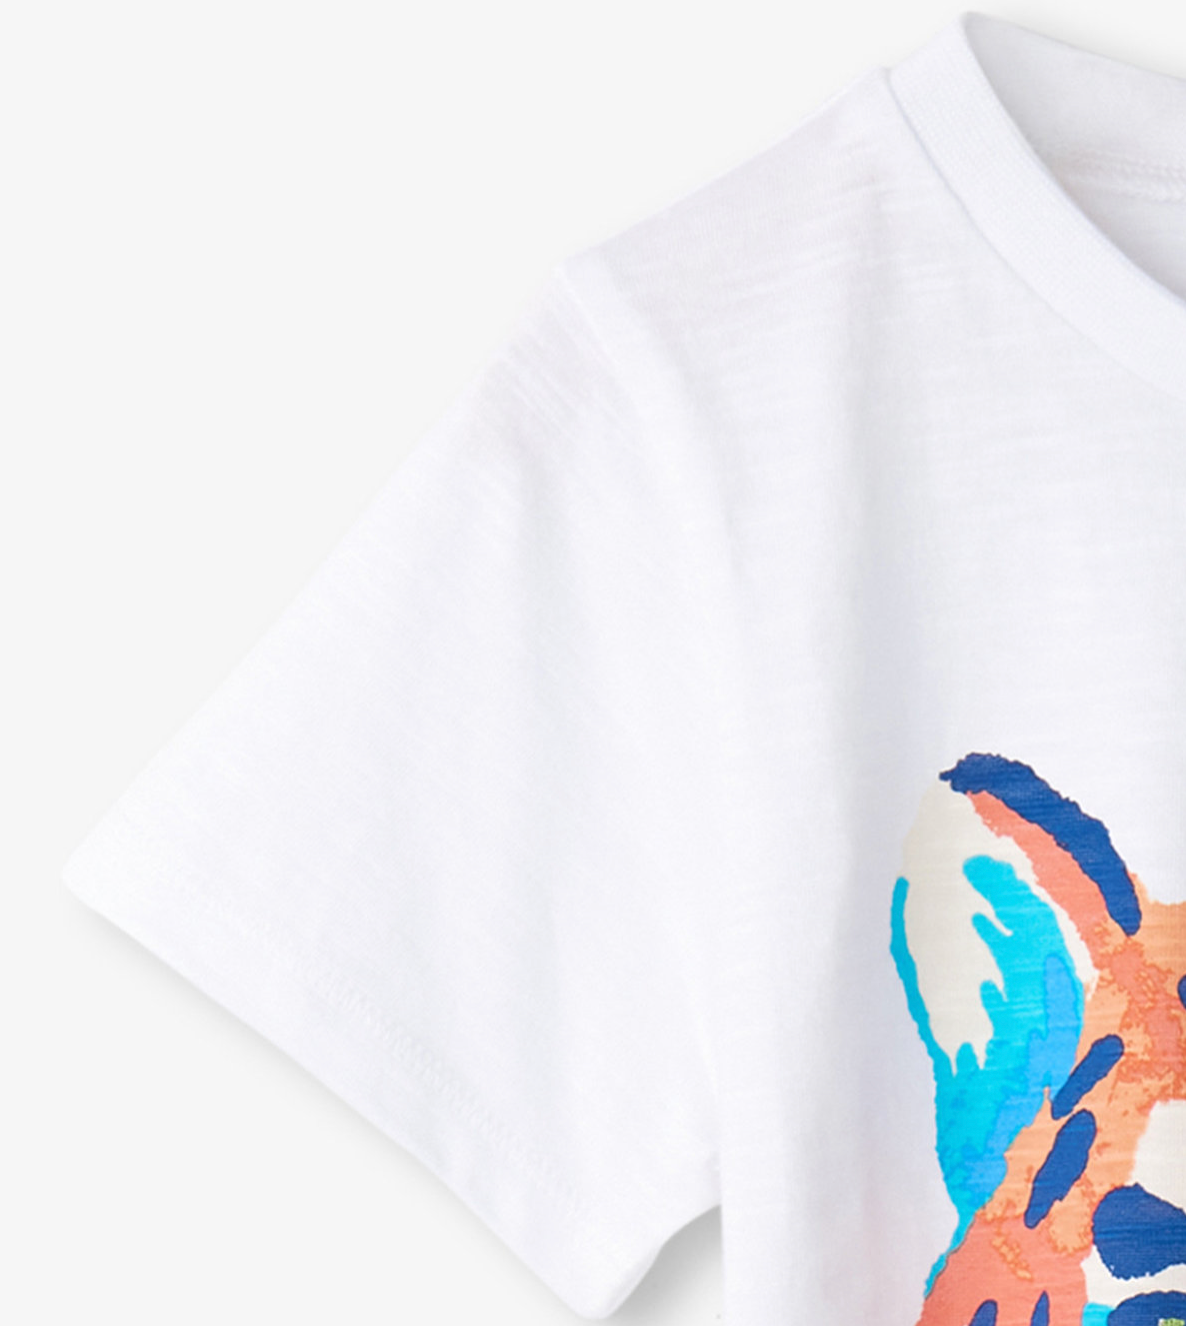 White Painted Tiger Graphic Tee